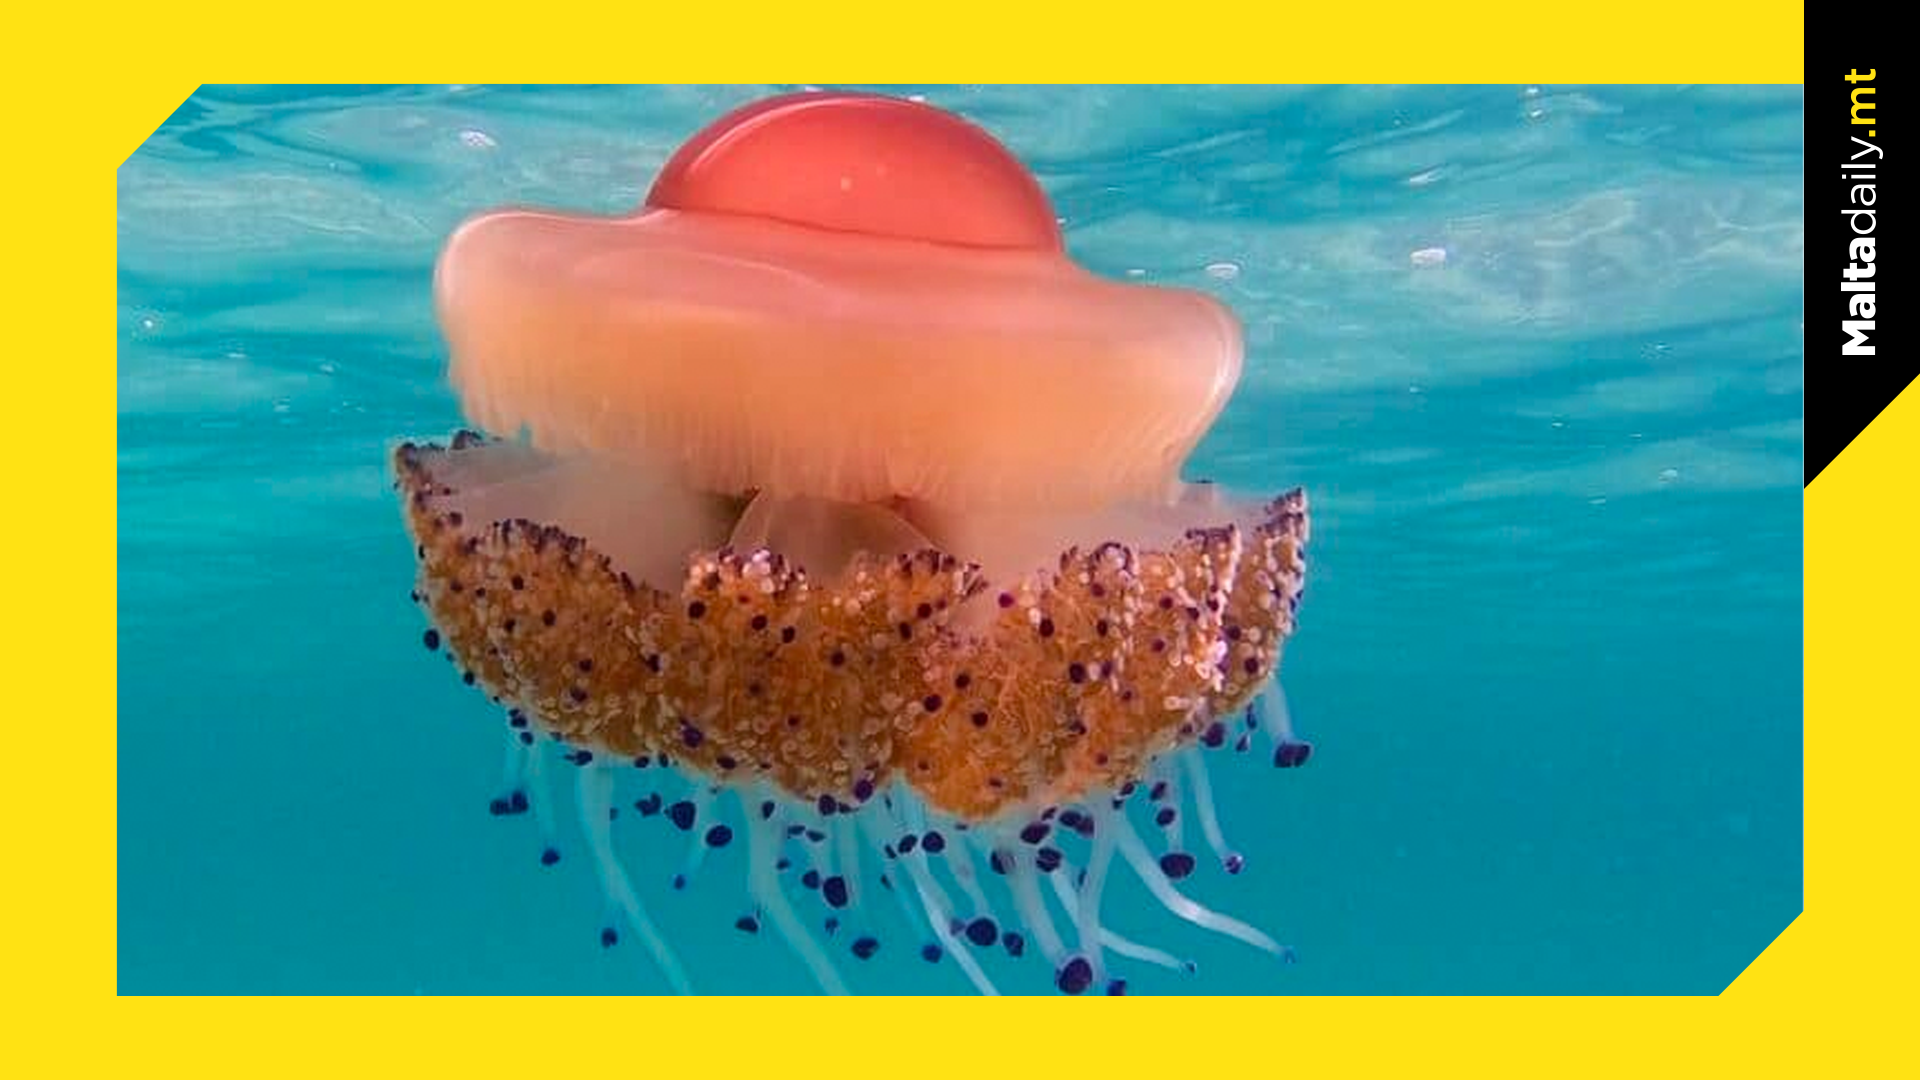 The Fried Egg Jellyfish Returns to Maltese Waters